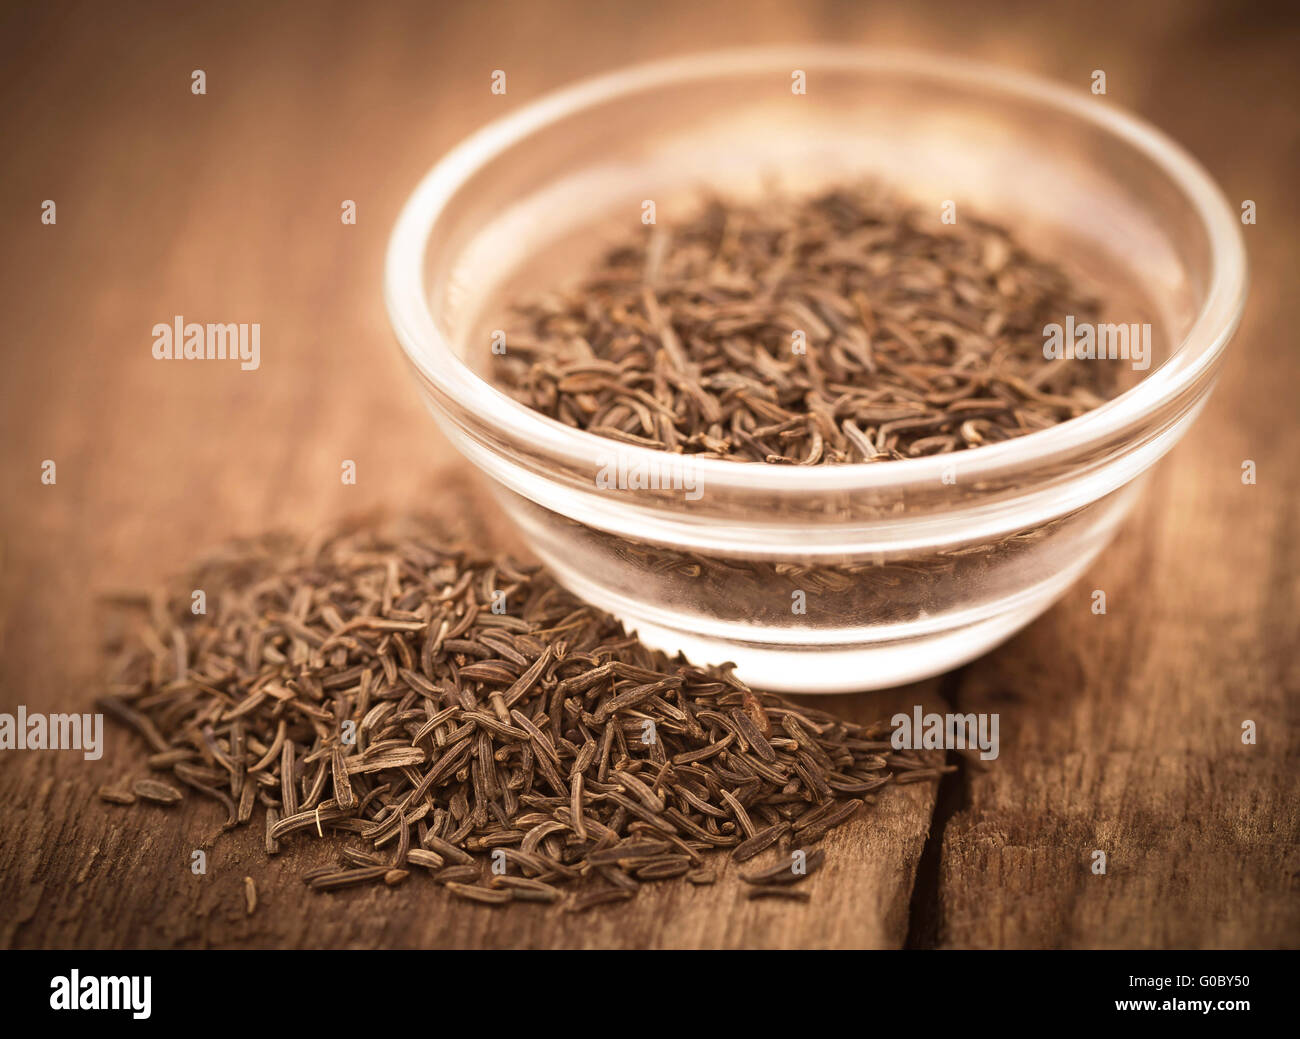 Caraway seeds in a glass bowl Stock Photo